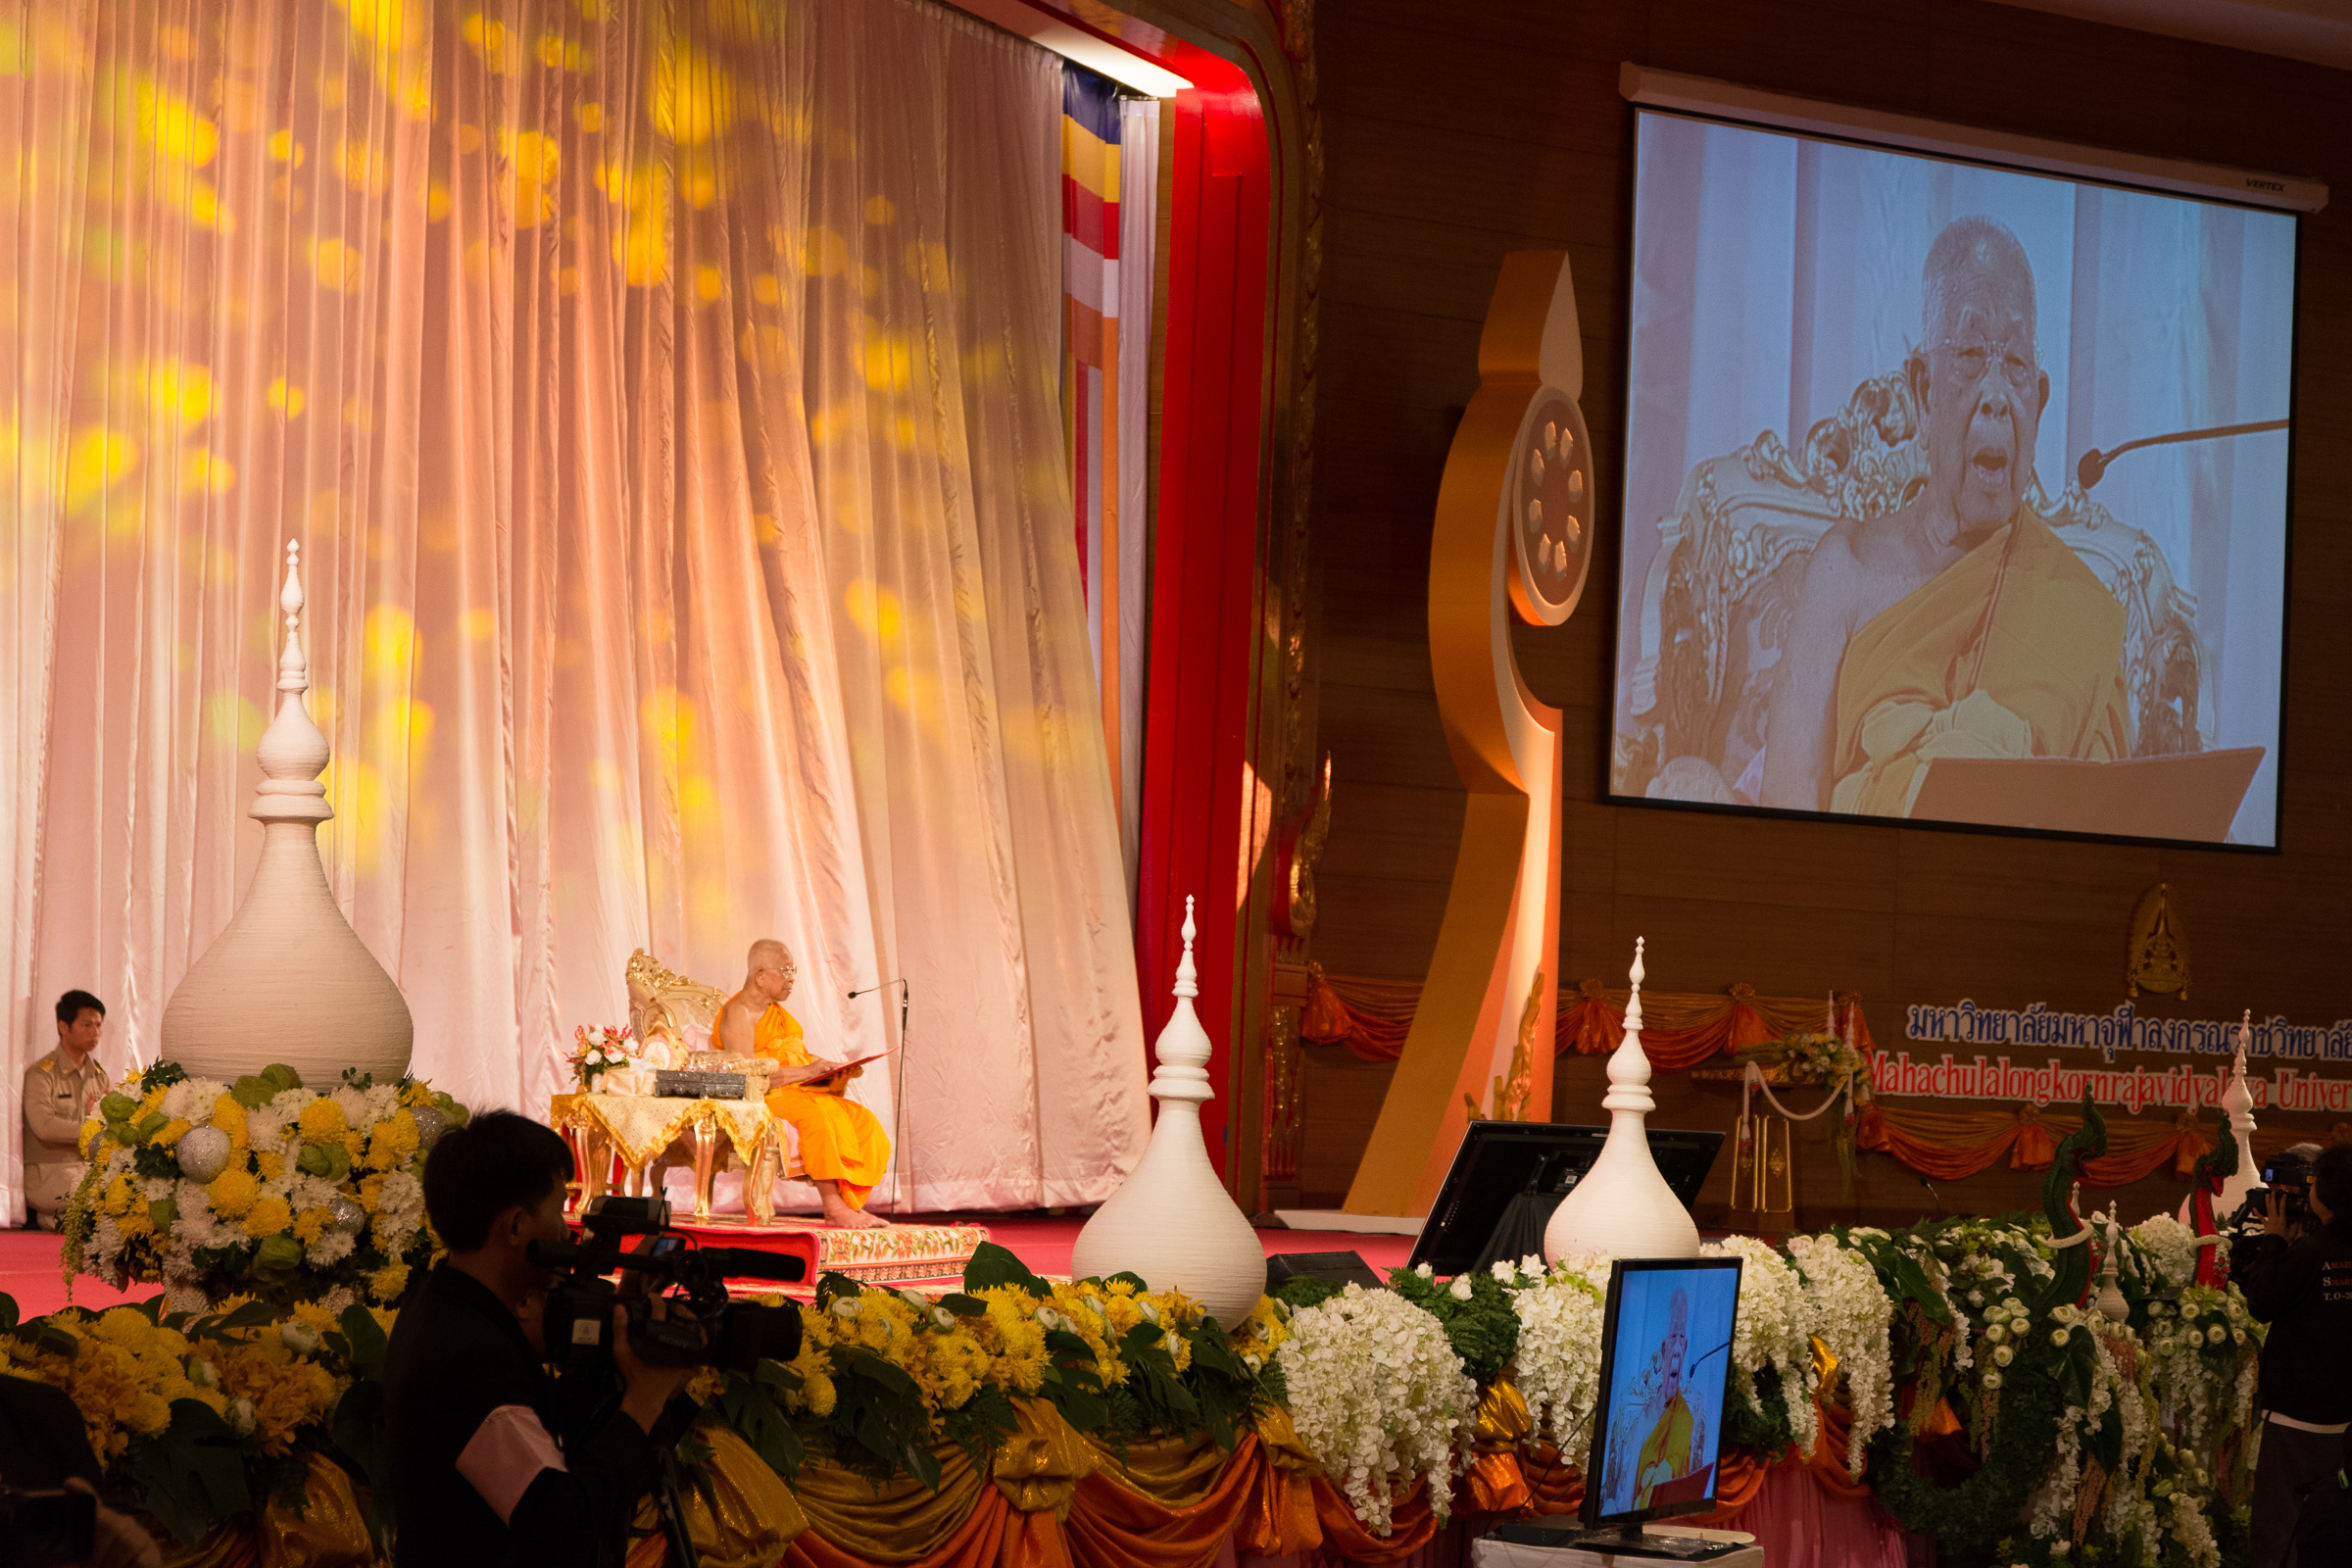 International Council for the Day of Vesak. Main theme: Buddhism and World Crisis